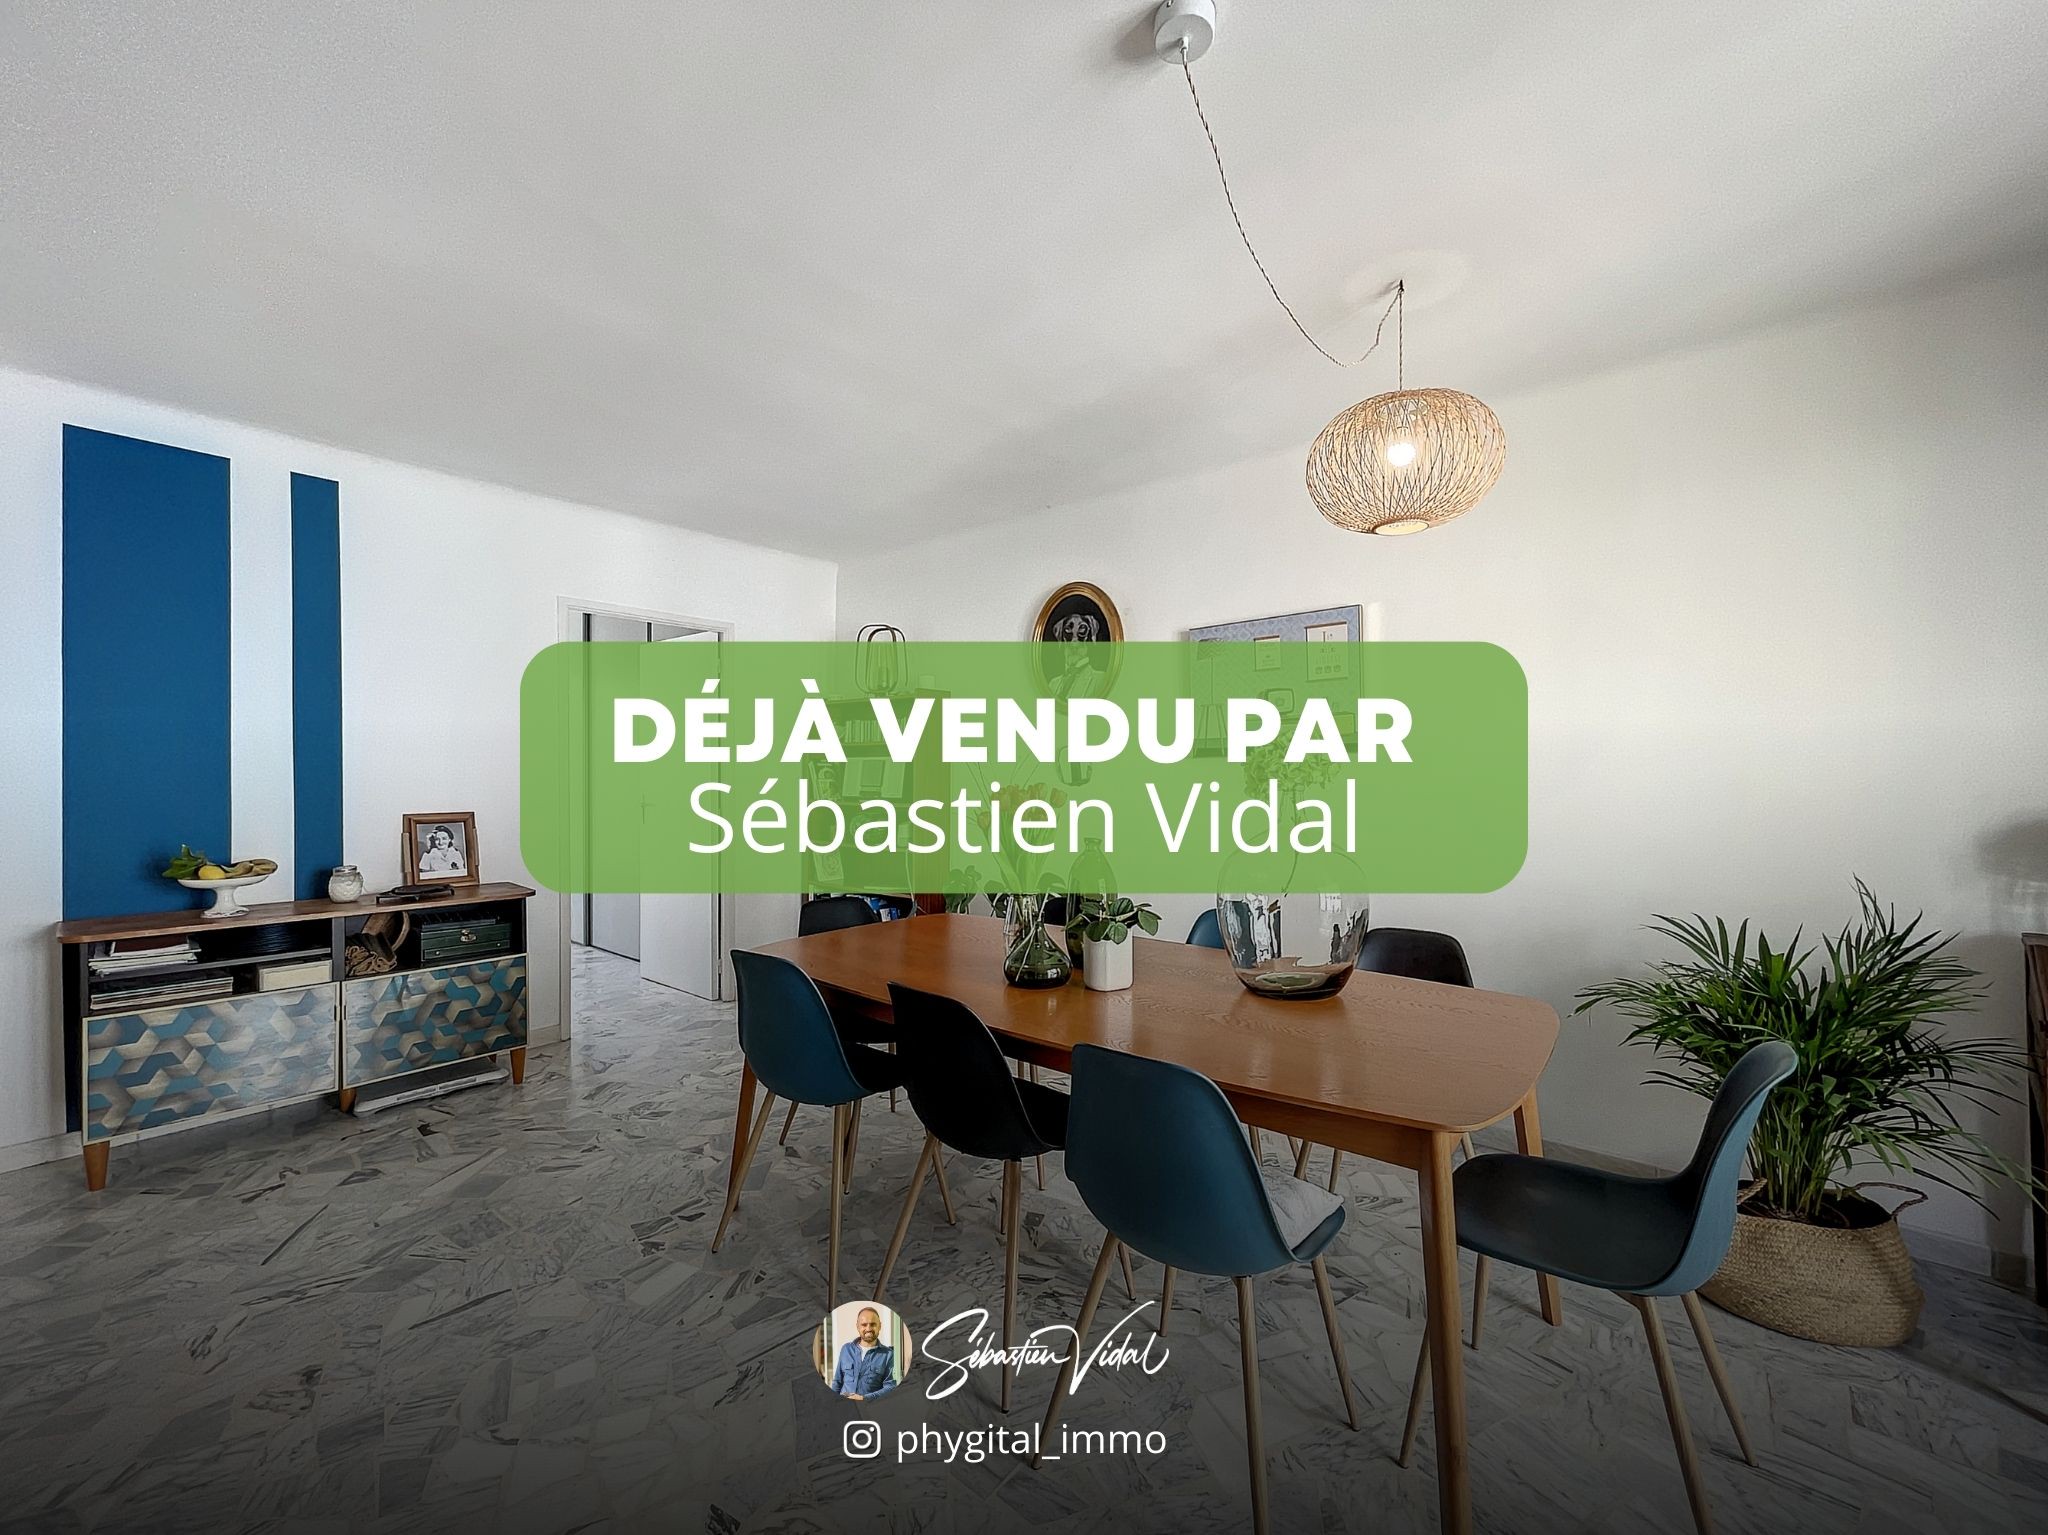 Vente Appartement 83m² 4 Pièces à Antibes (06600) - Phygital.Immo